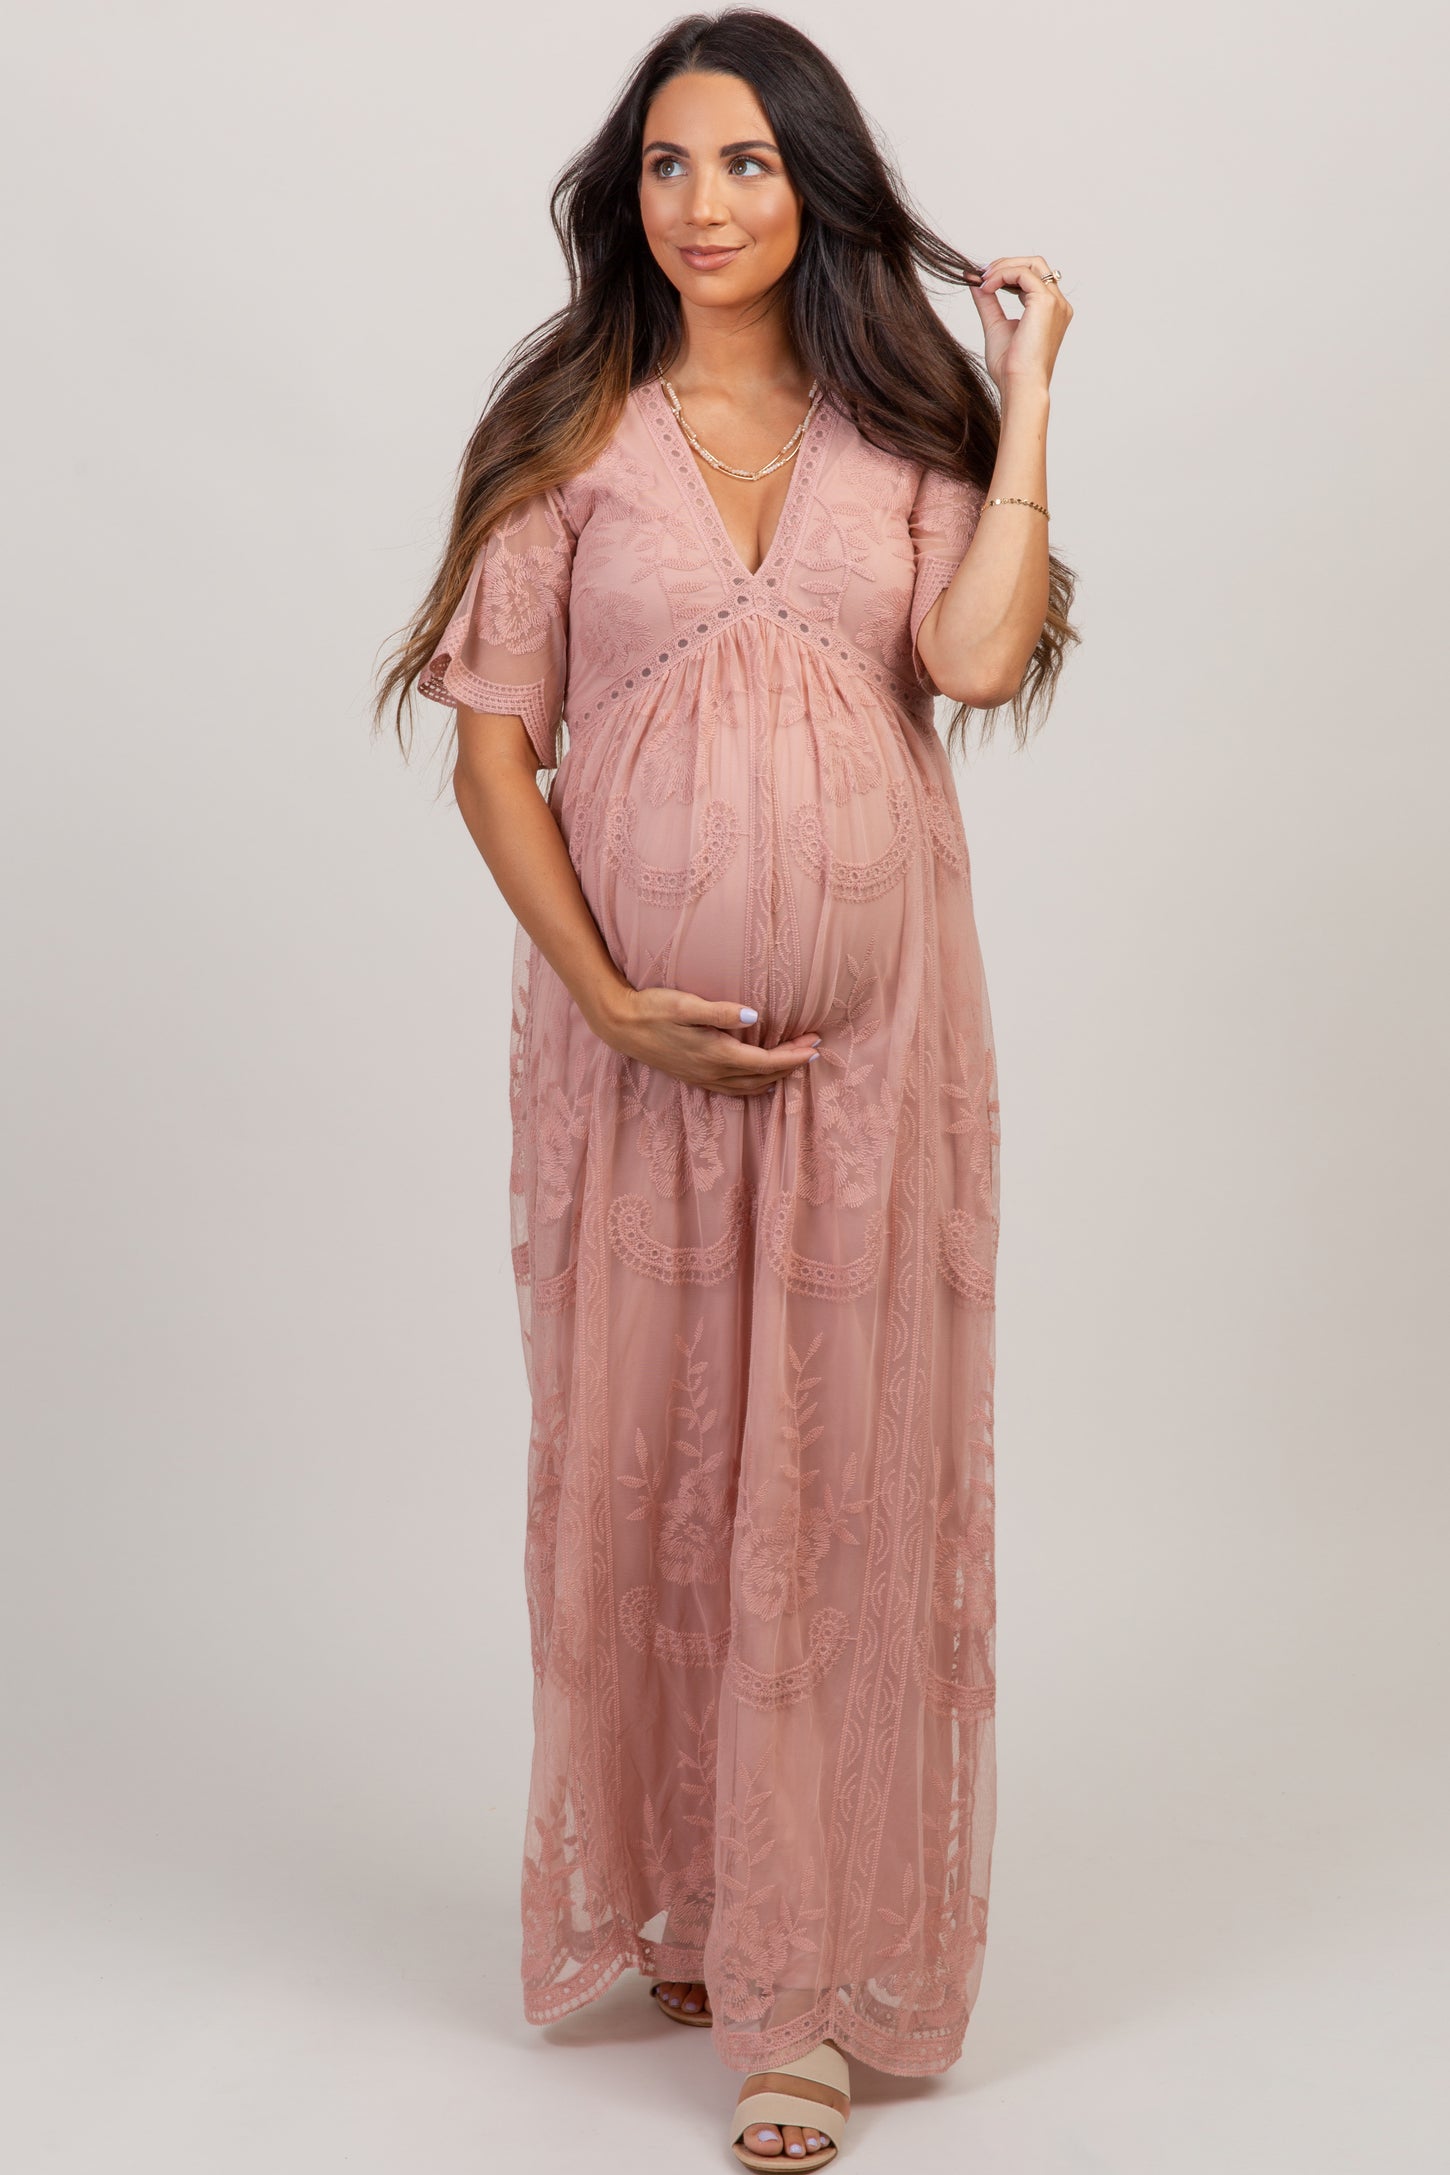 PinkBlush Maternity Beige Lace Overlay Tie Accent Maternity Dress, Small at   Women's Clothing store